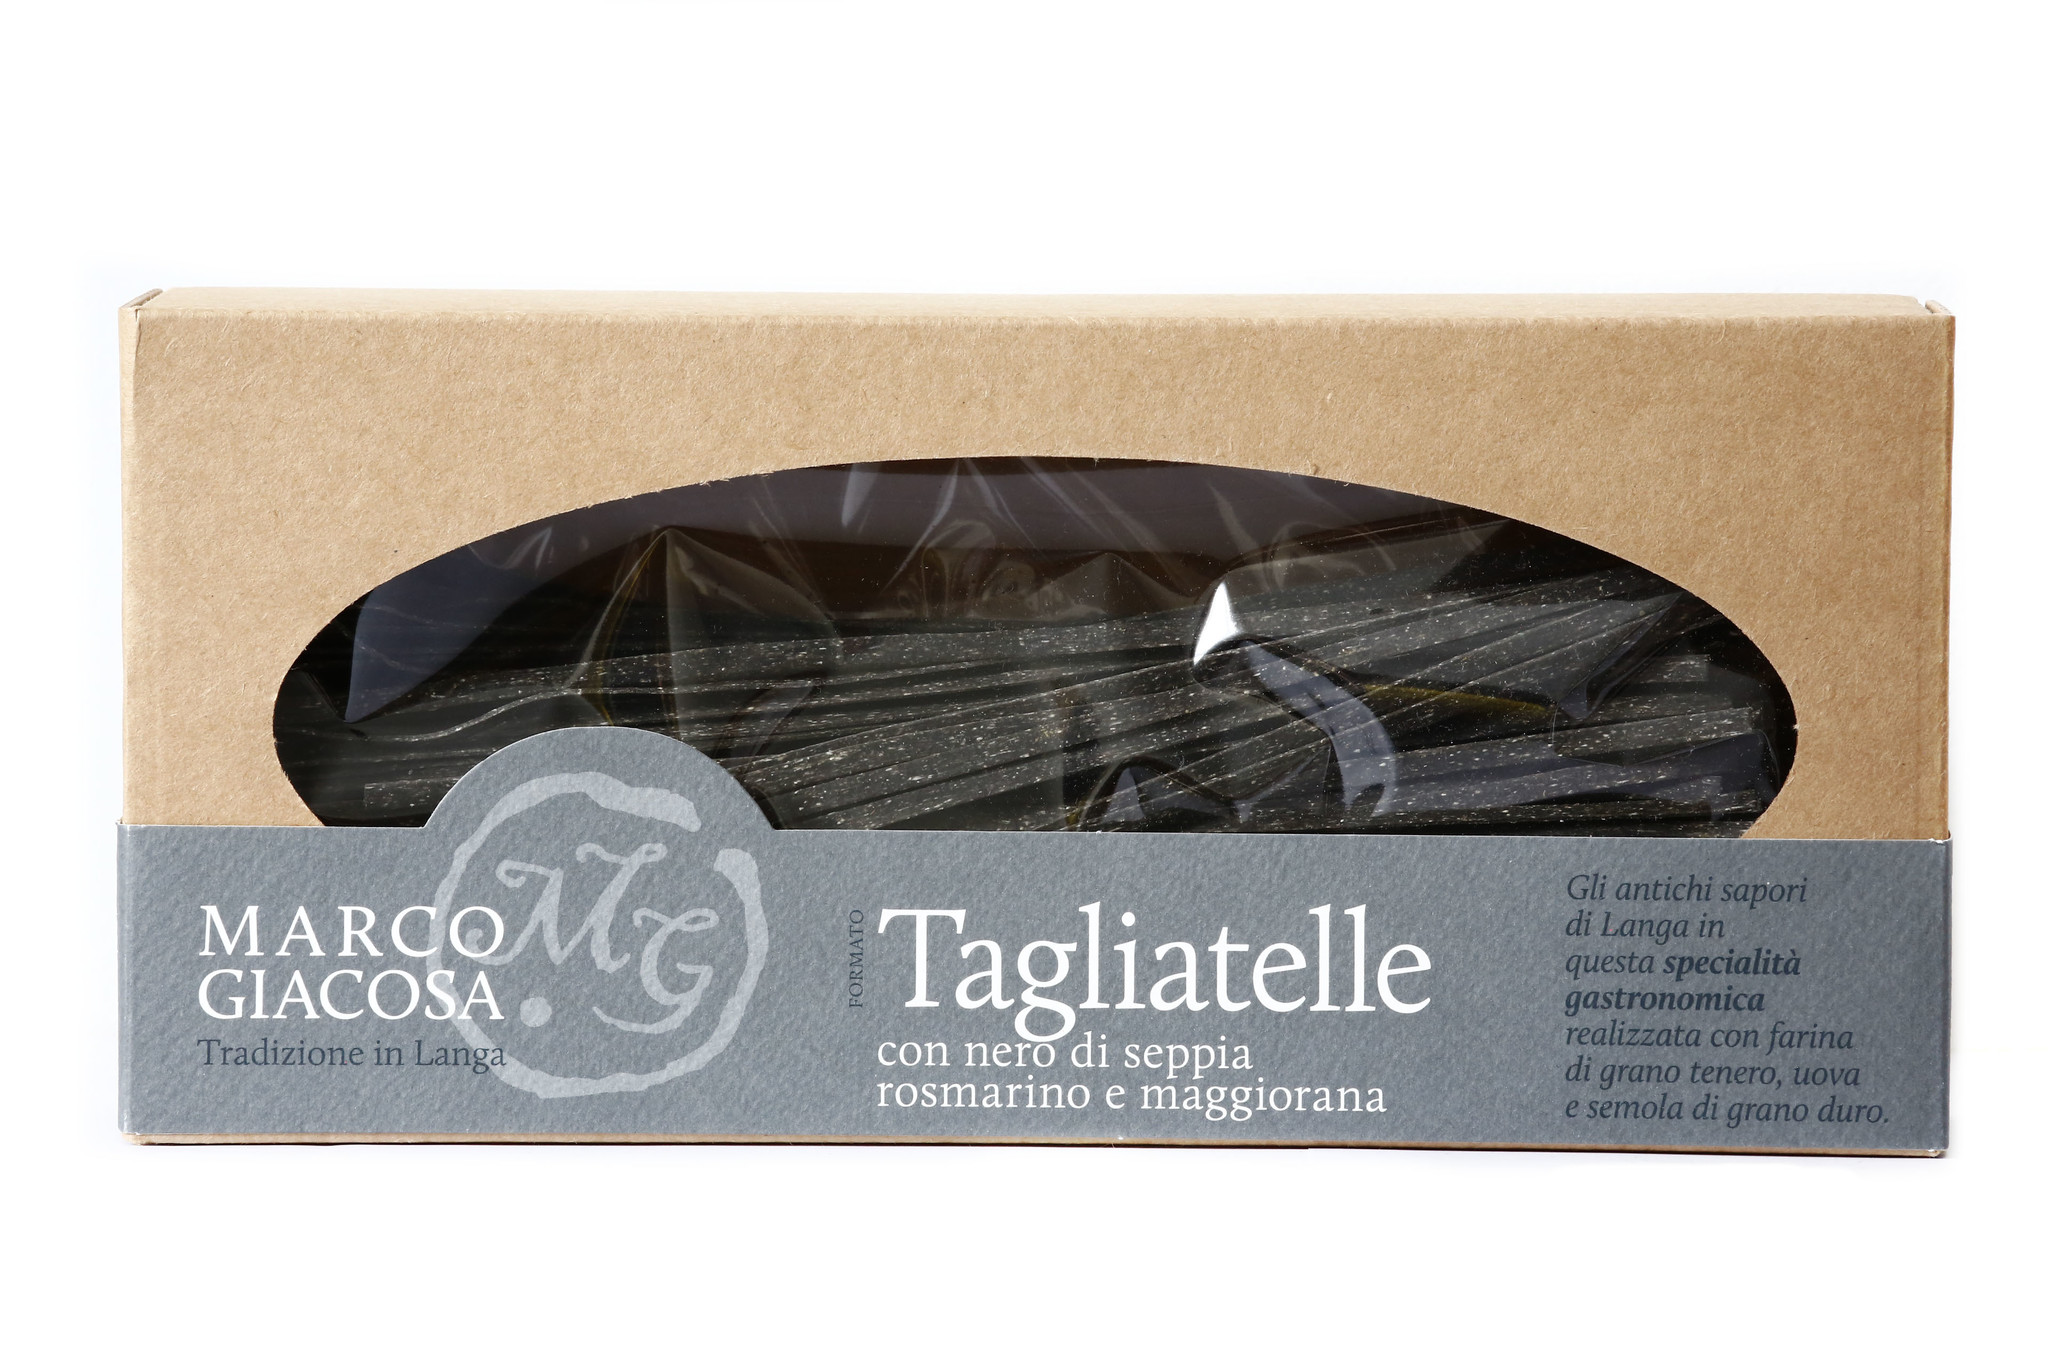 Marco Giacosa "Marco Giacosa" Tagliatelle Pasta with Sepia, Rosemary and Marjoram 16/250g